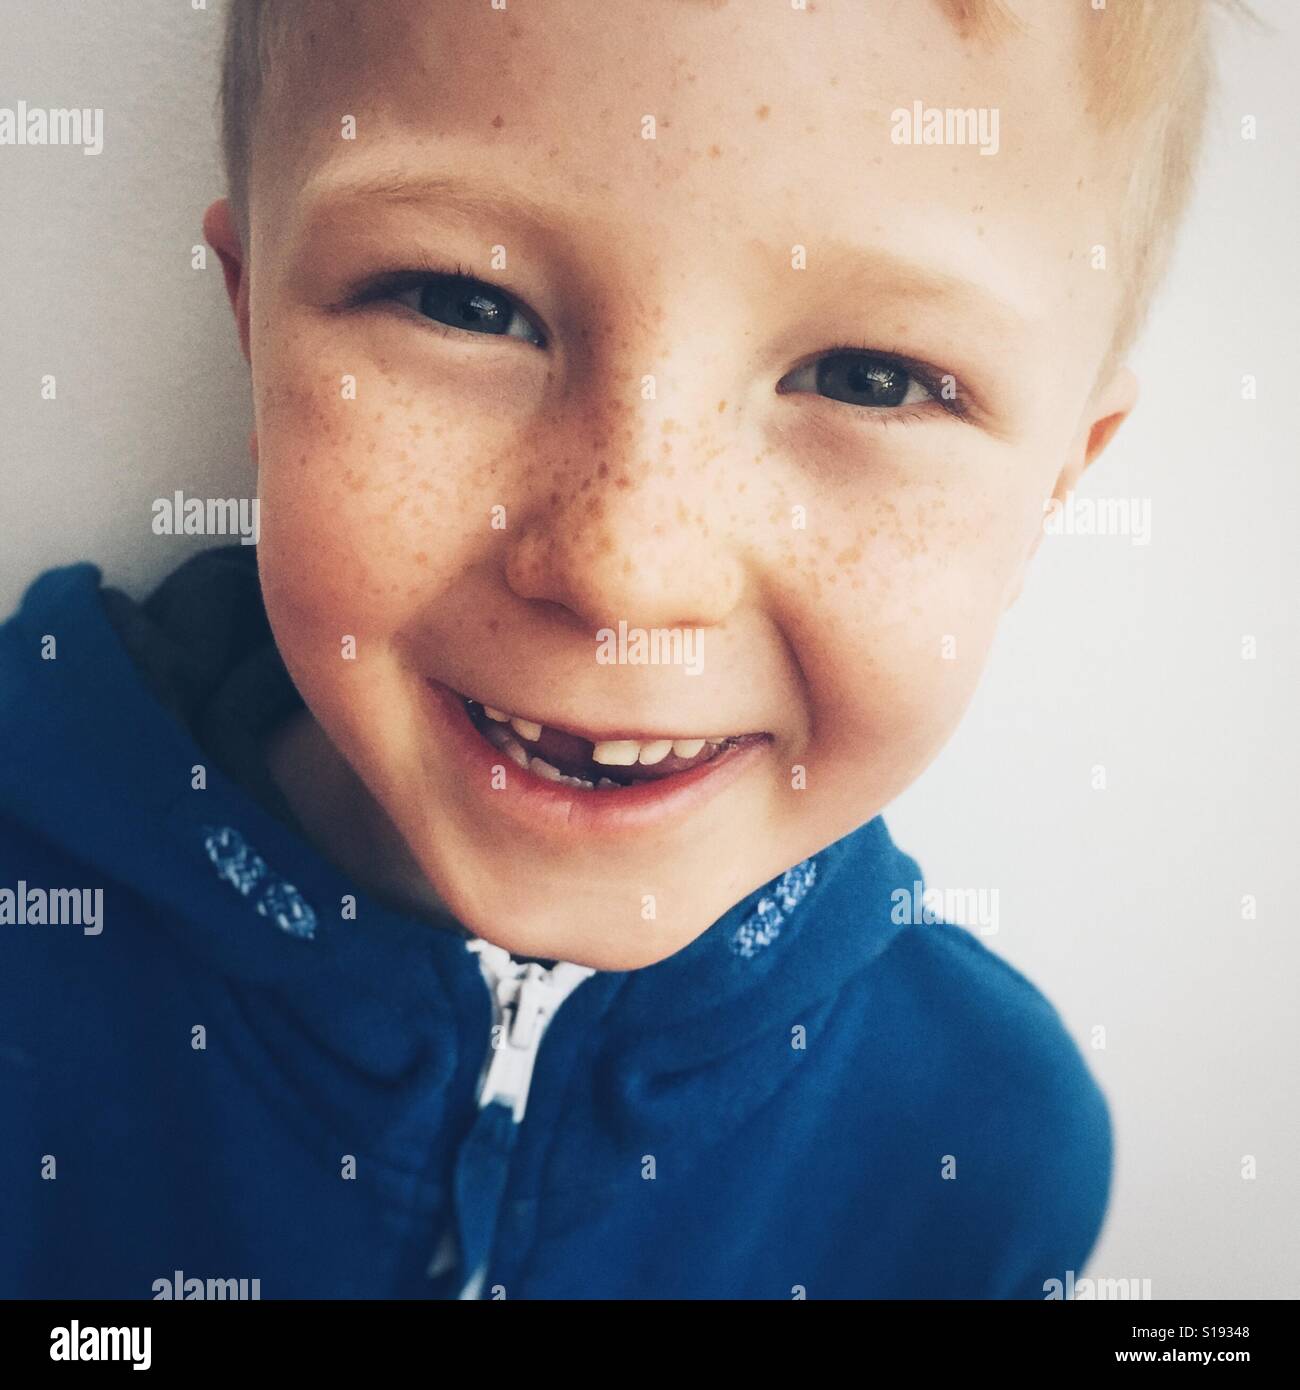 Smiling seven year old boy with missing tooth Stock Photo